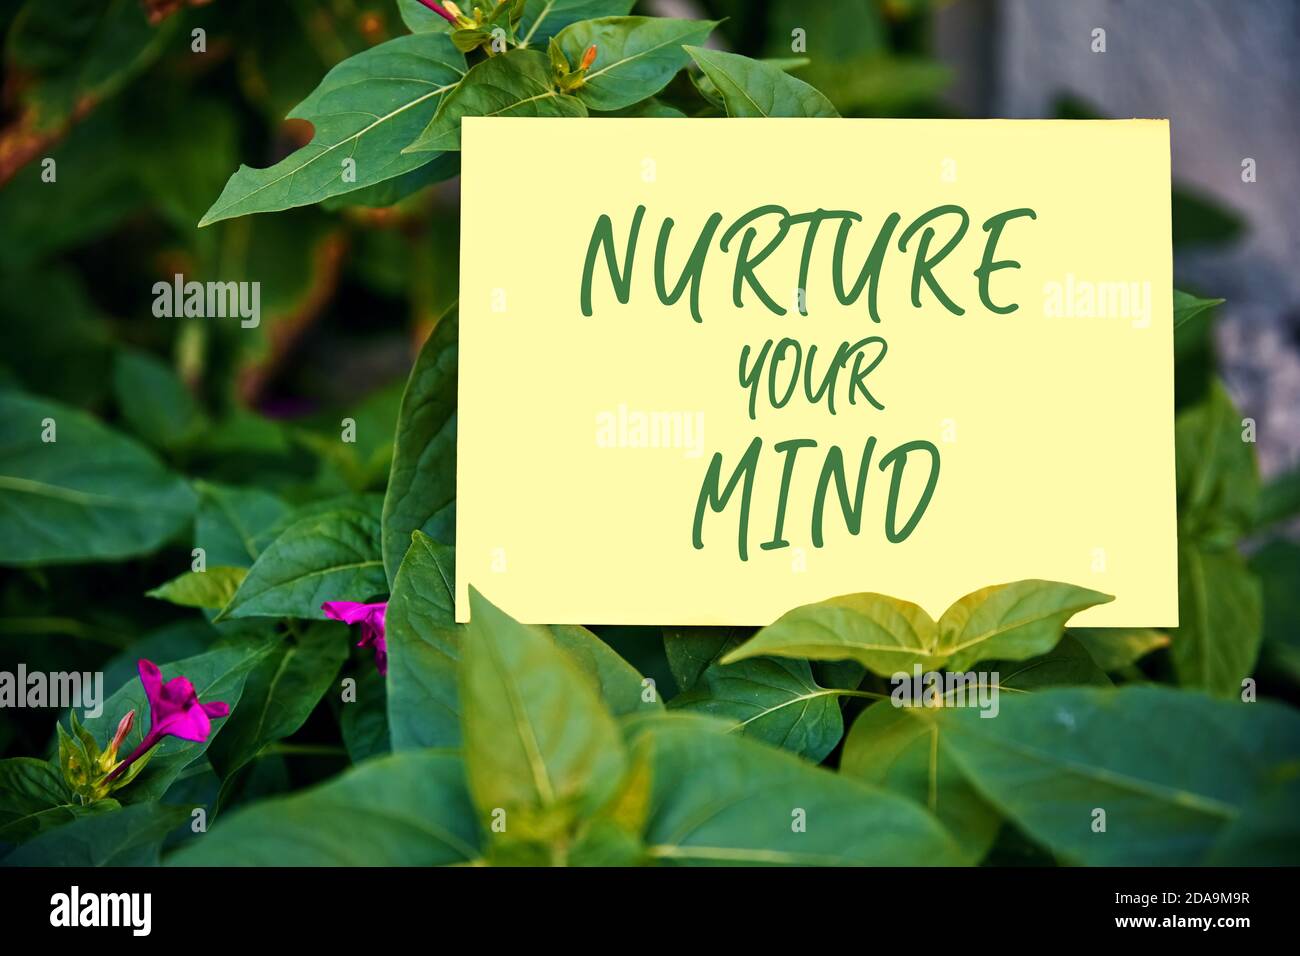 Nurture your mind motivational quote written on paper on green garden background. The effect of thoughts on mind and body concept. Stock Photo